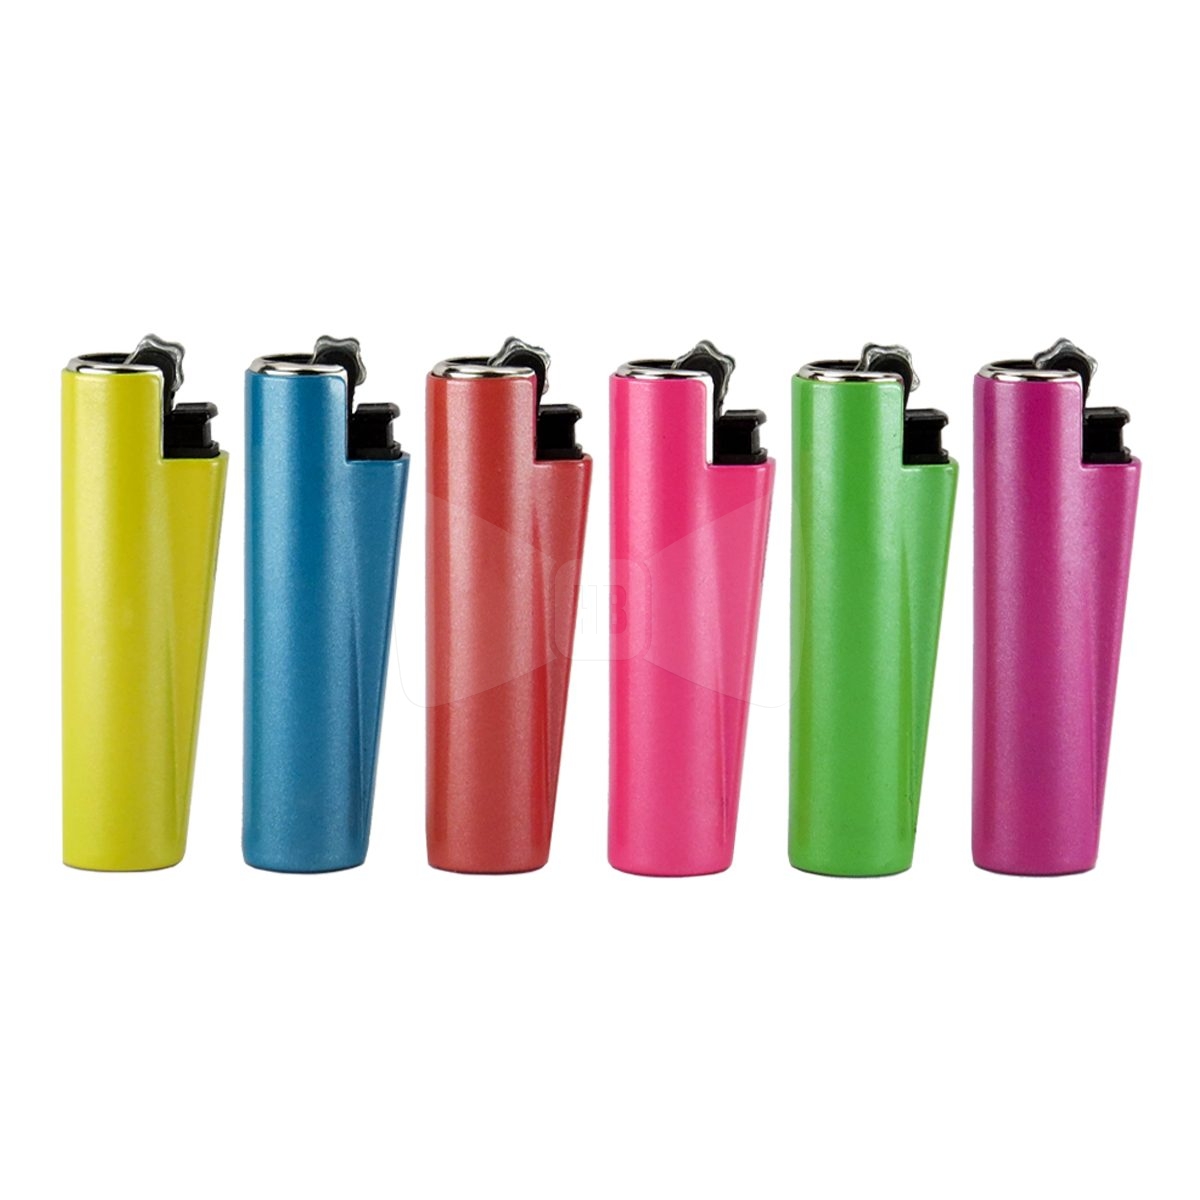 Clipper Metal Cased Happy Color Lighters 6 Pack